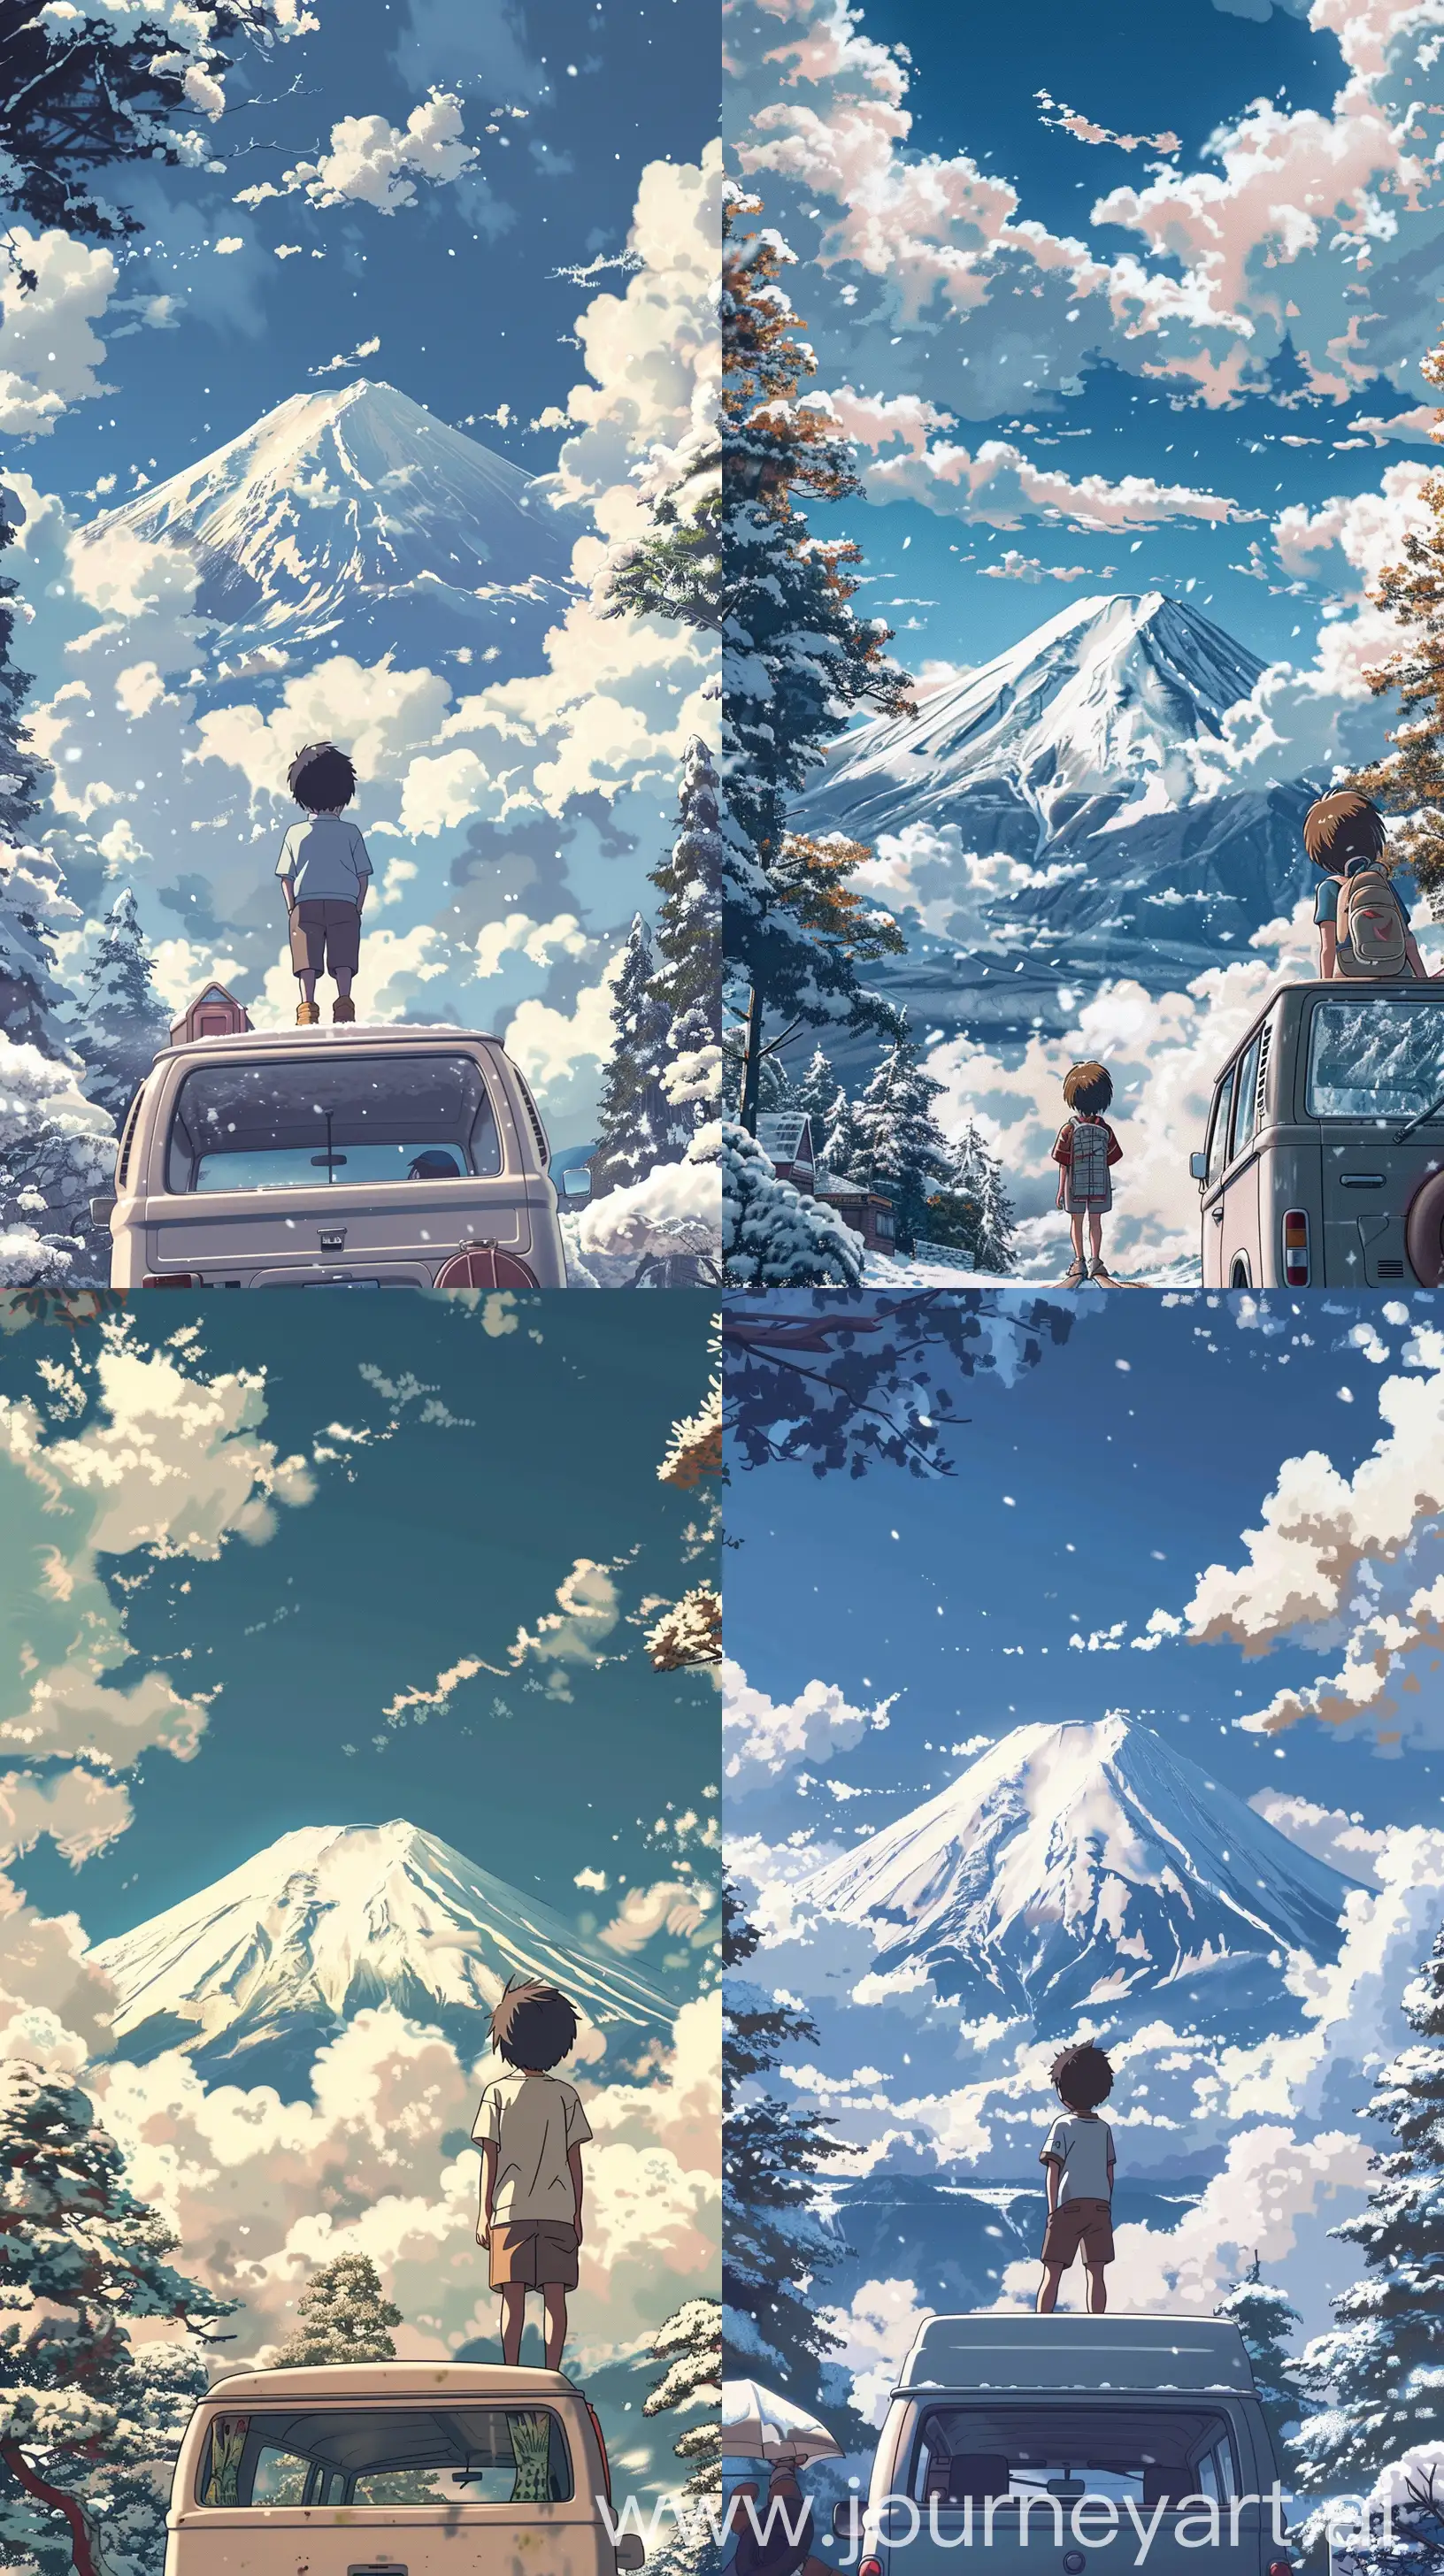 Japanese-Anime-Boy-Contemplating-Nature-from-a-Van-with-Snowy-Landscape